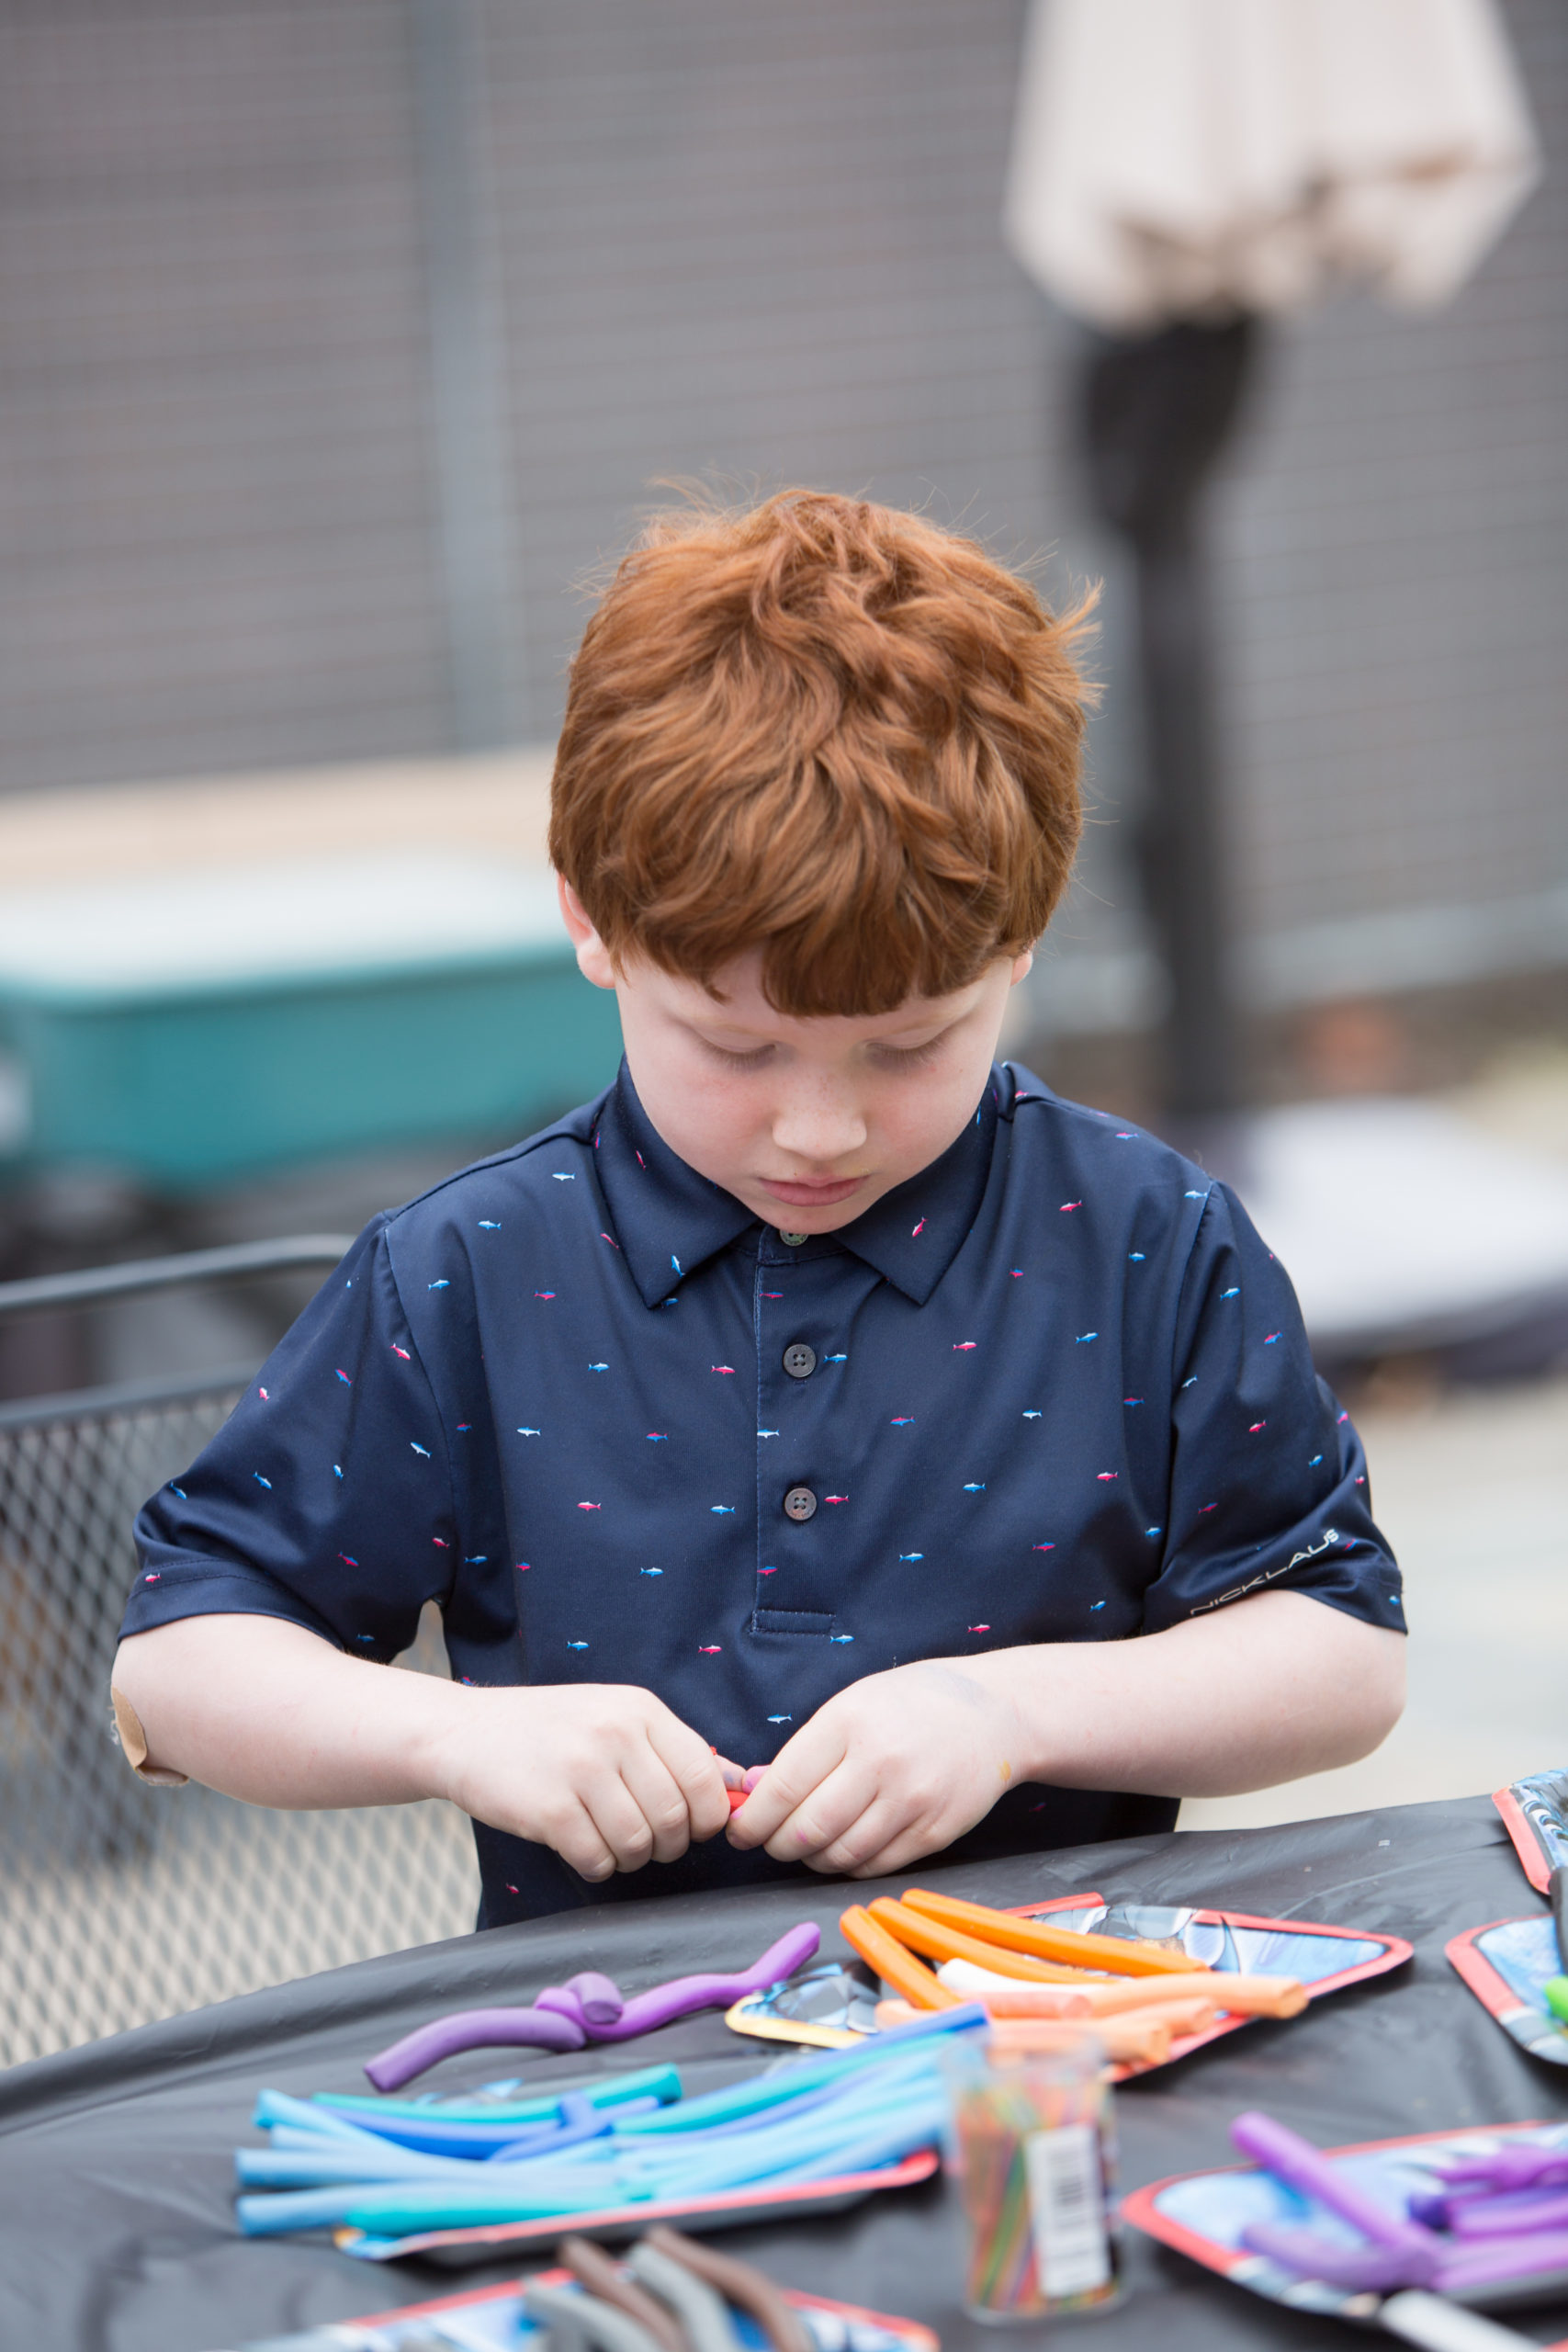 A boy is outdoors at a table molding pieces of clay